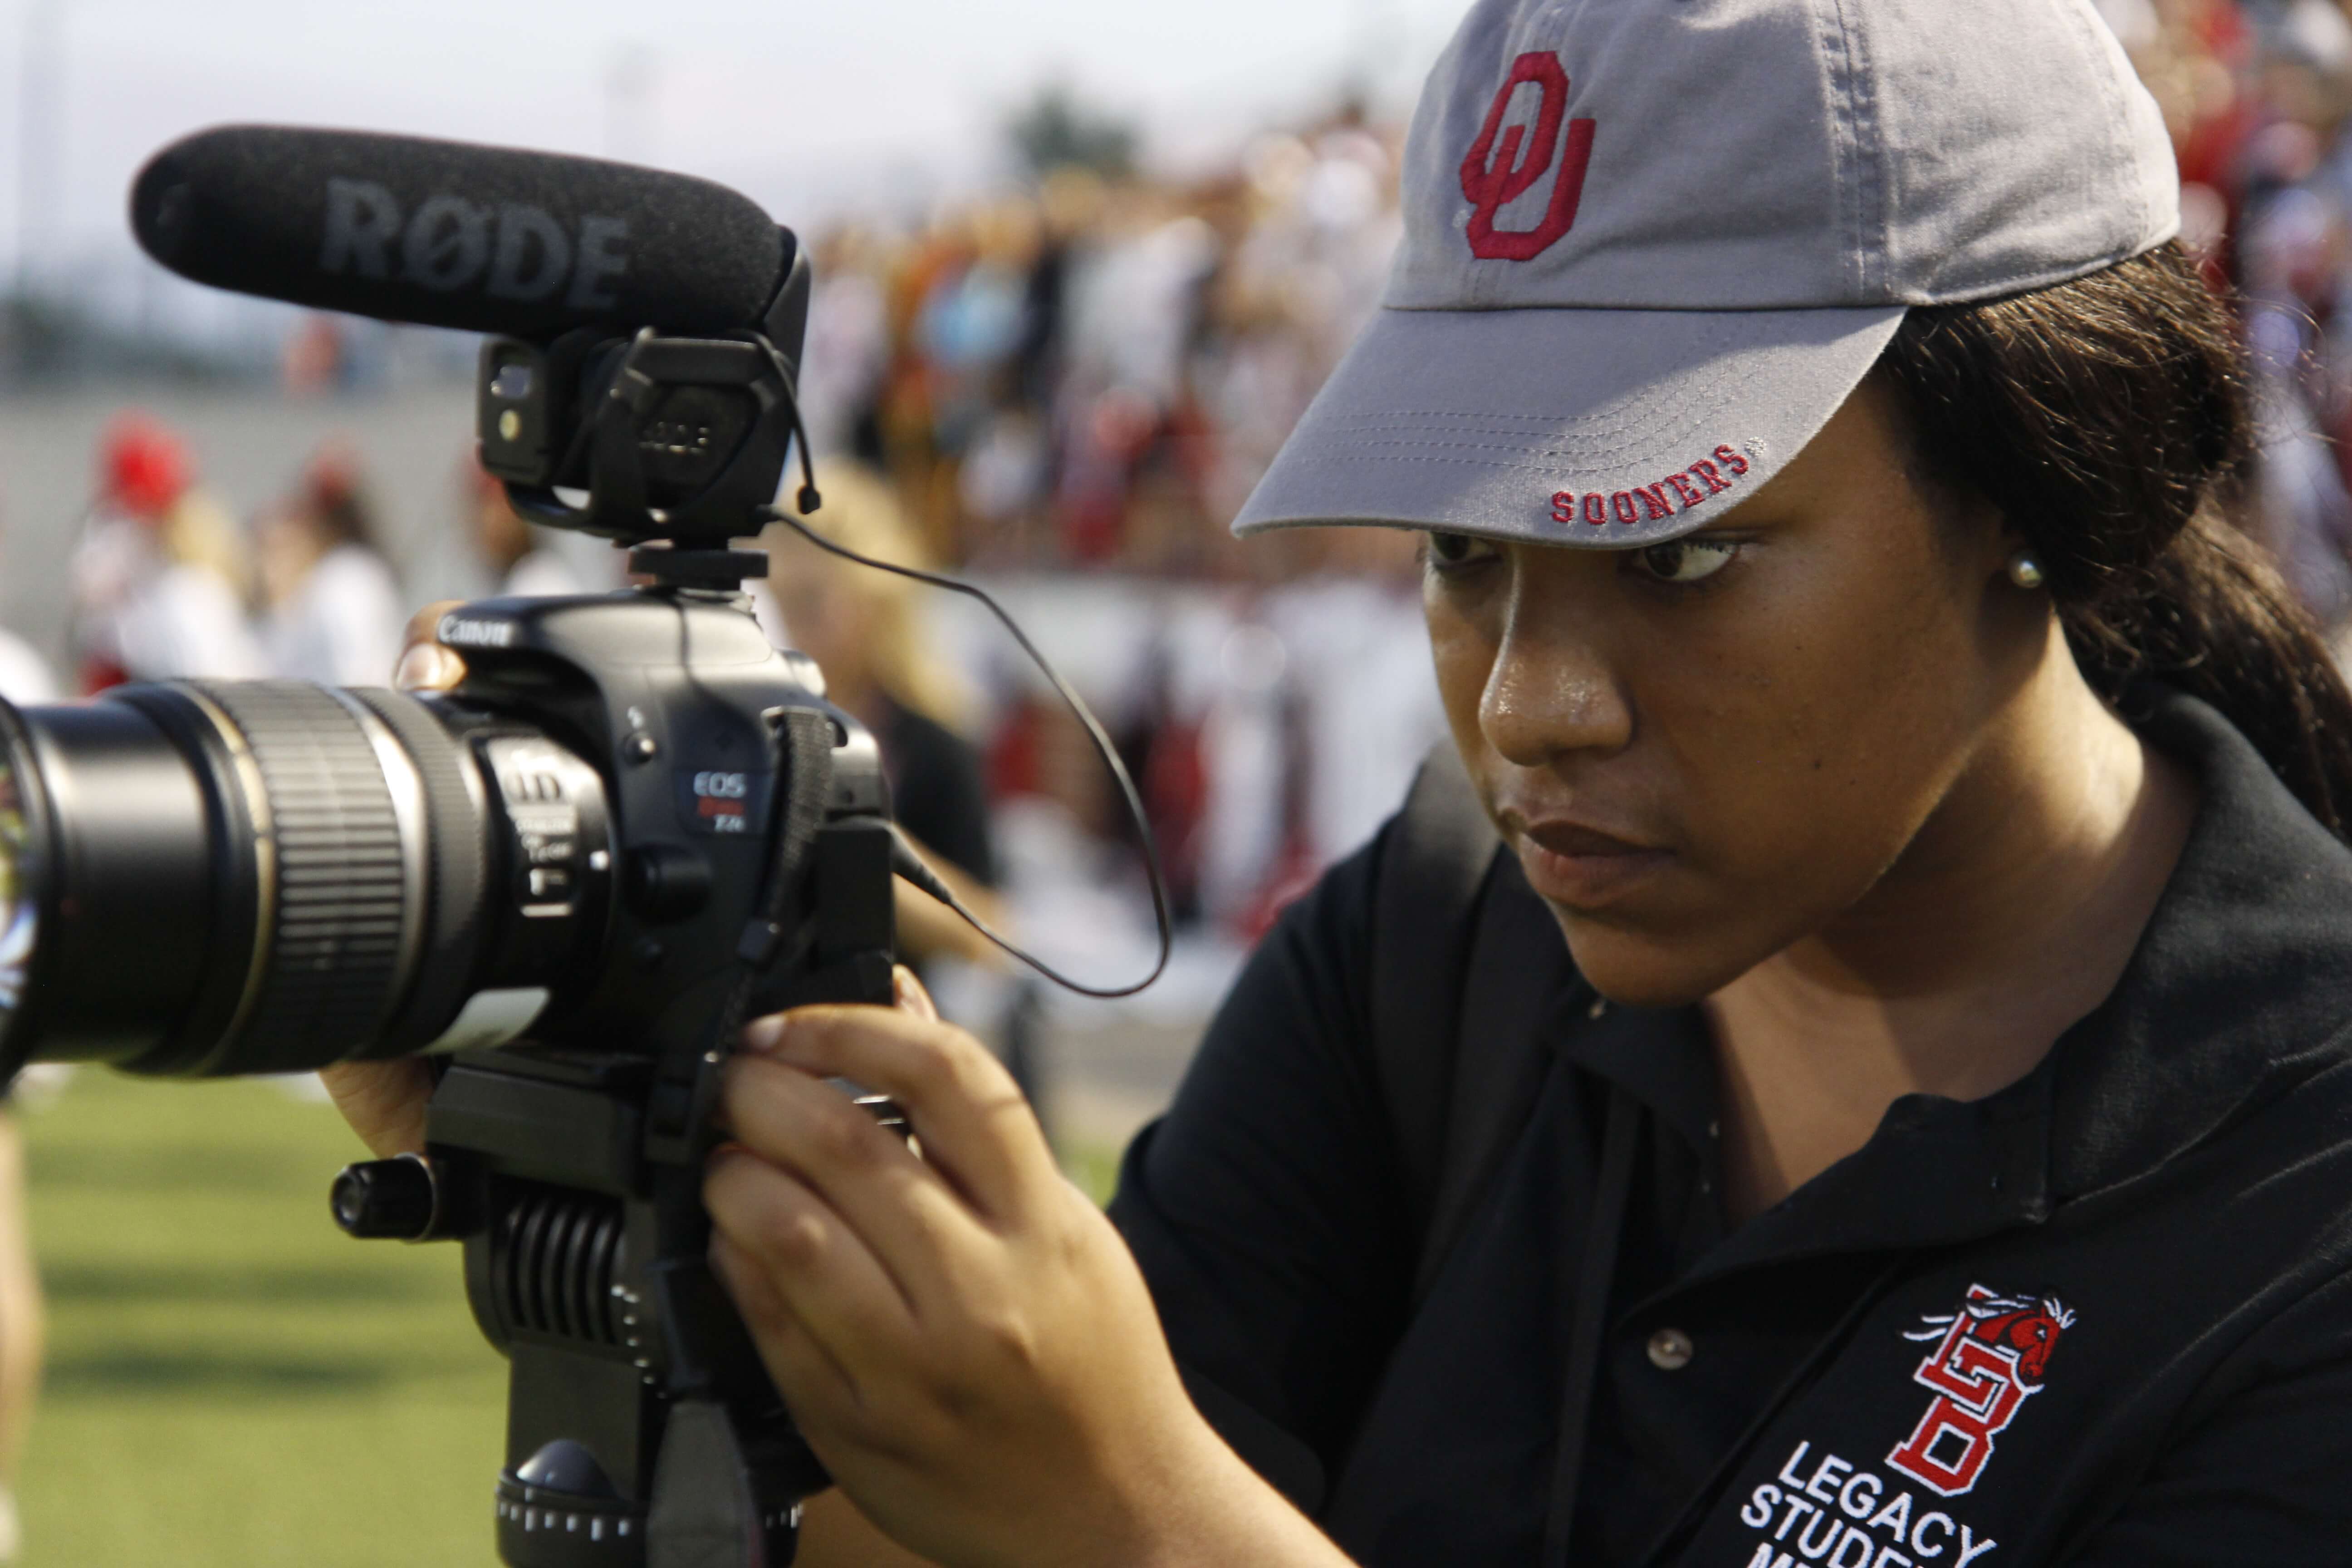 Legacy Student Media covers all of Legacy High School. Whether it's a football game or club event, student's have an upfront pass to all things Legacy.